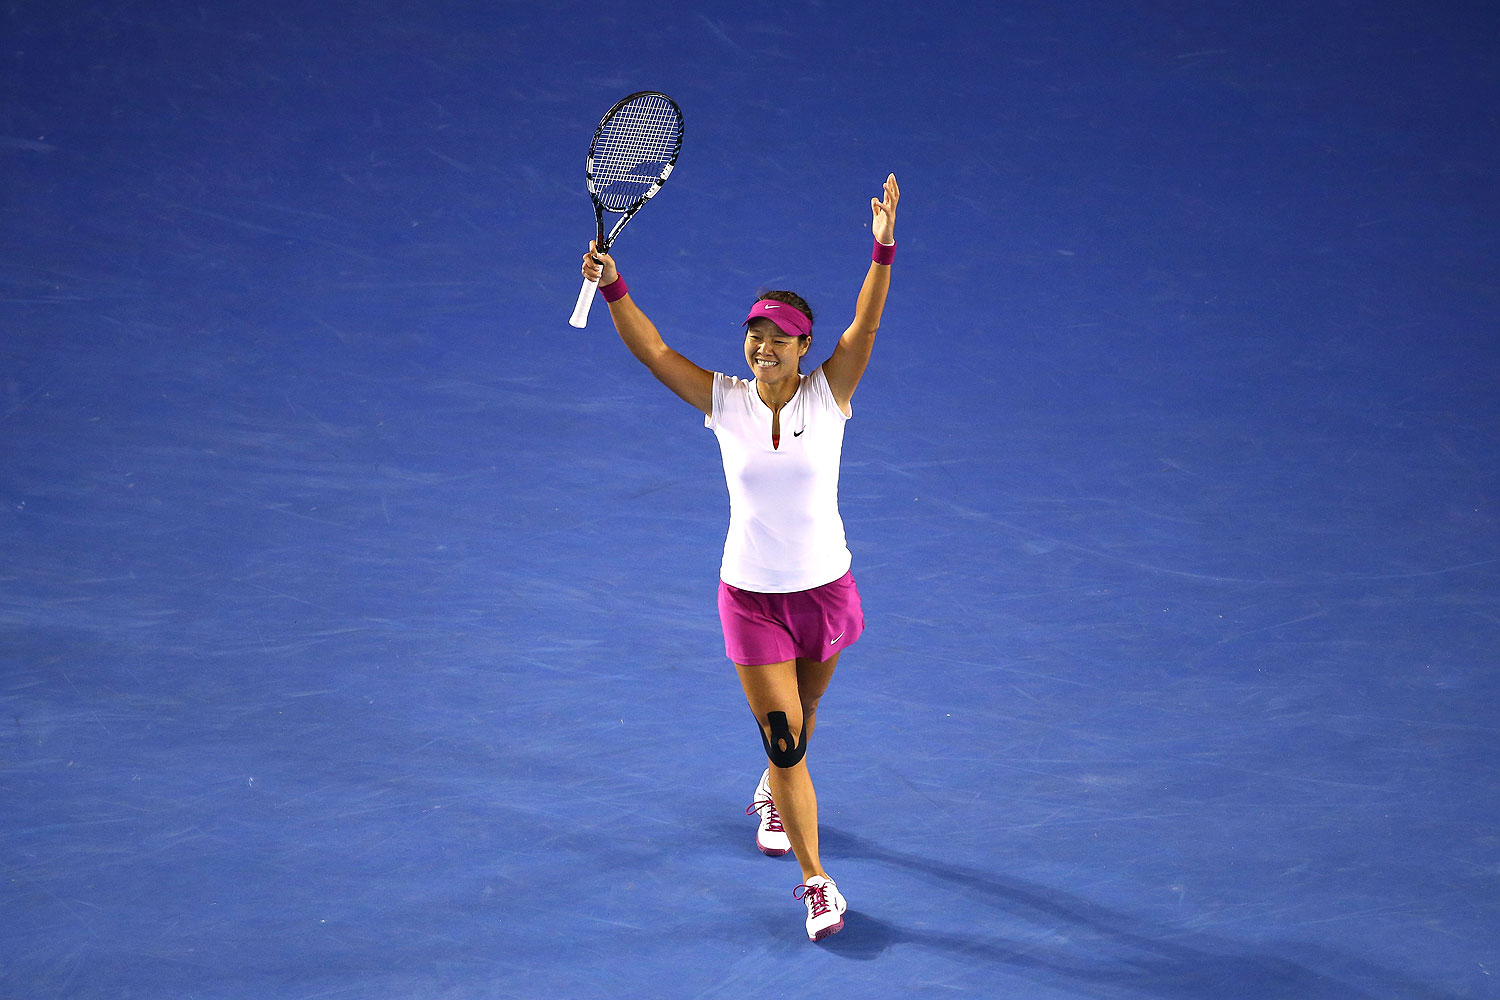 Li Na of China celebrates winning the Australian Open in Melbourne on Jan. 25, 2014 (Quinn Rooney / Getty Images)